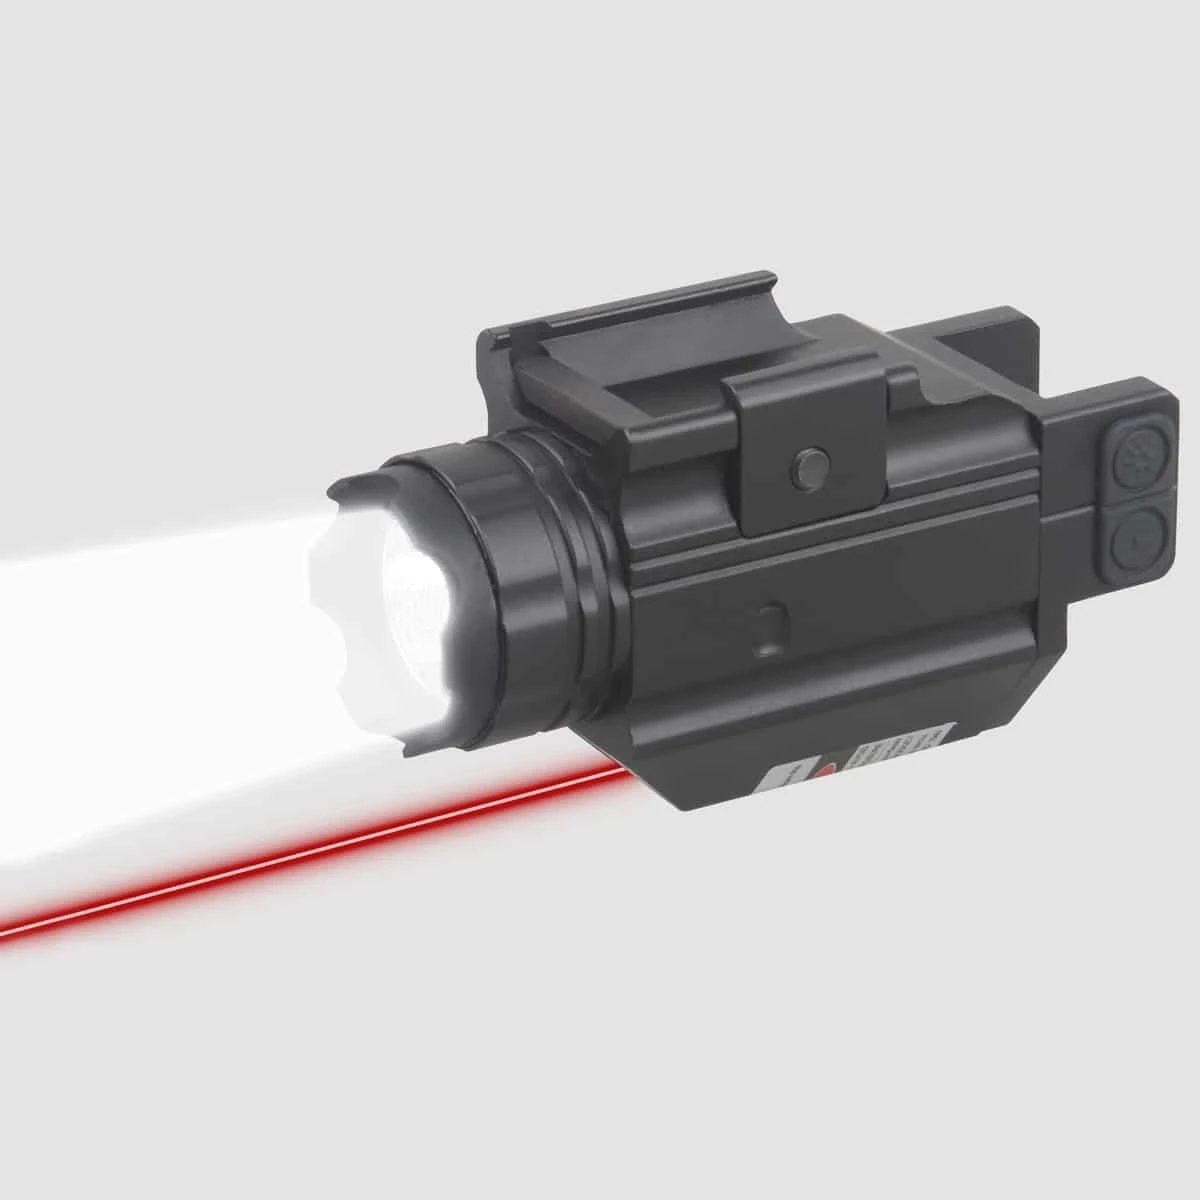 Doublecross Compact Red Laser